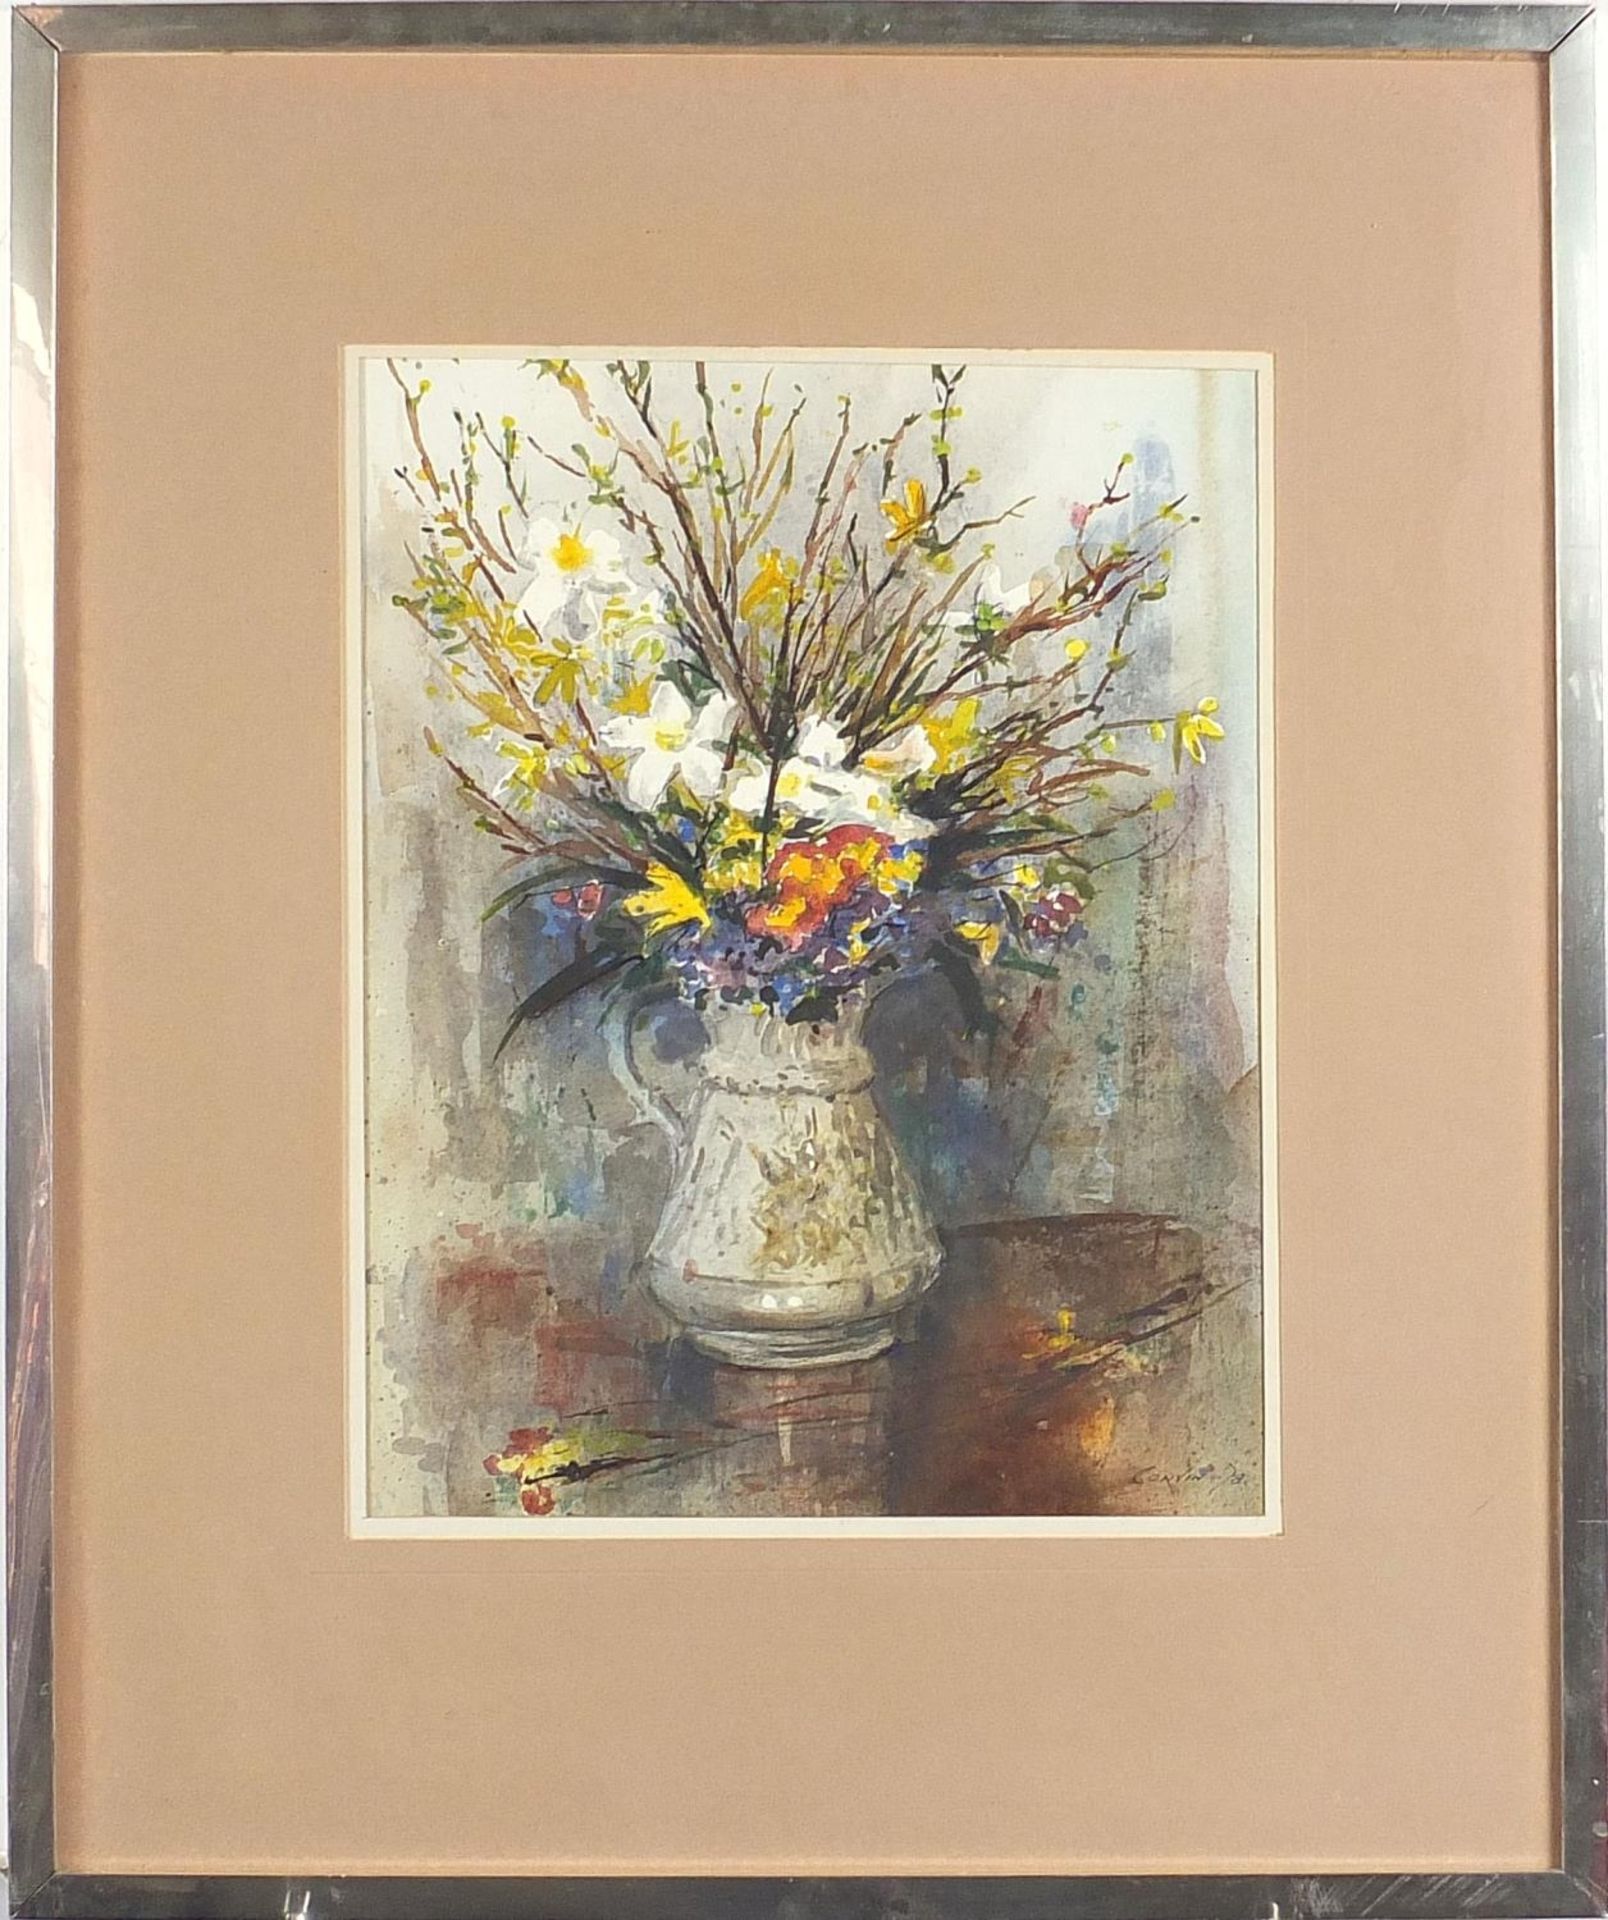 John Corvin 1978 - Still life flowers in a jug, watercolour, mounted, framed and glazed, 35cm x 26. - Image 2 of 5